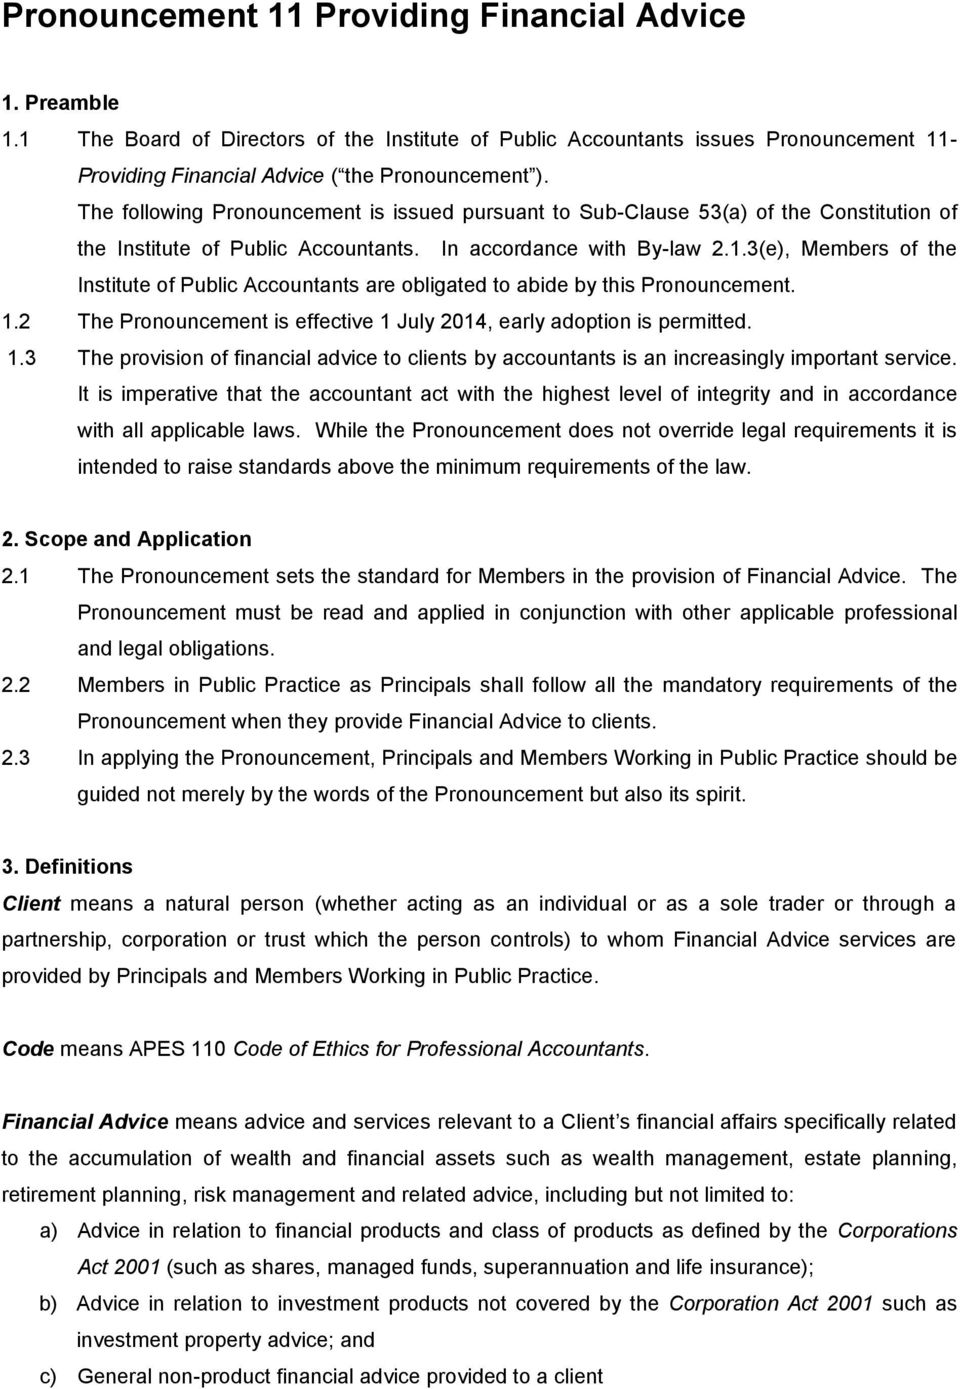 3(e), Members of the Institute of Public Accountants are obligated to abide by this Pronouncement. 1.2 The Pronouncement is effective 1 July 2014, early adoption is permitted. 1.3 The provision of financial advice to clients by accountants is an increasingly important service.